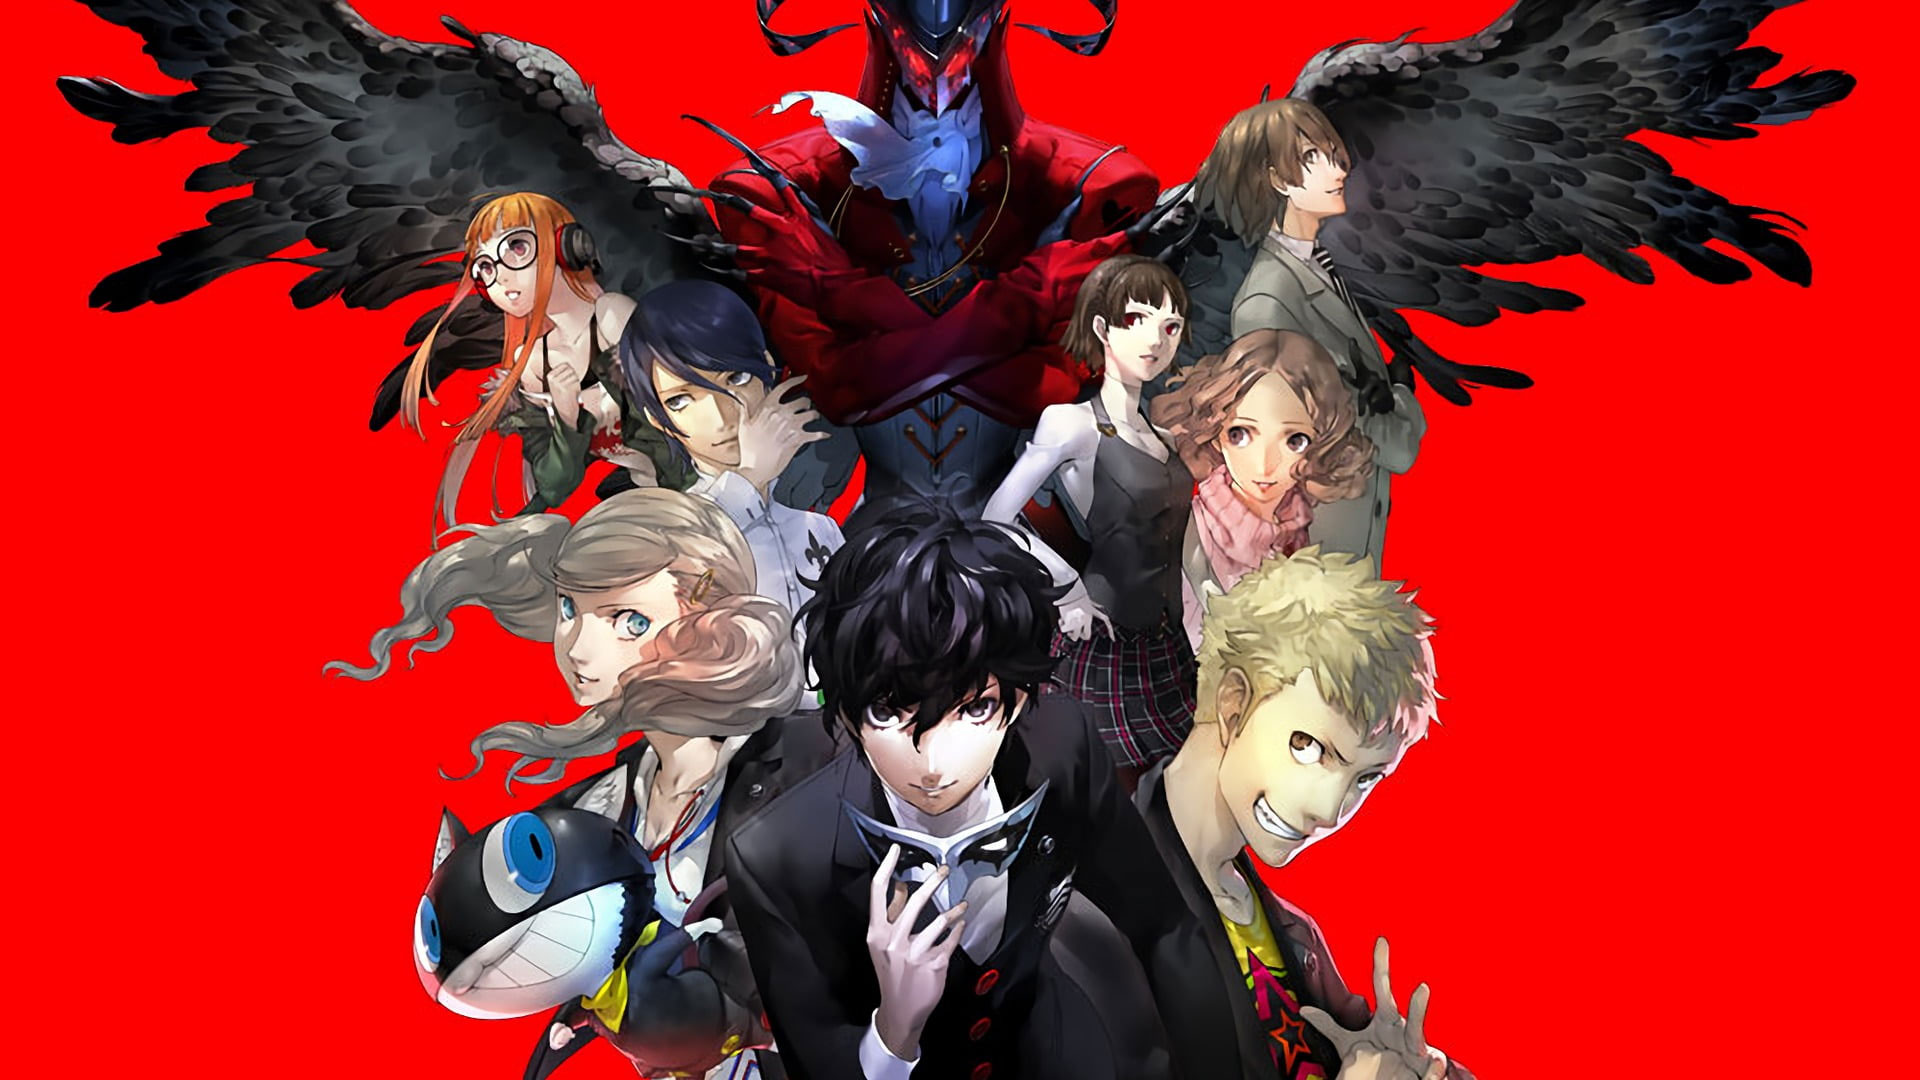 Anime Character Wallpaper, Persona 5